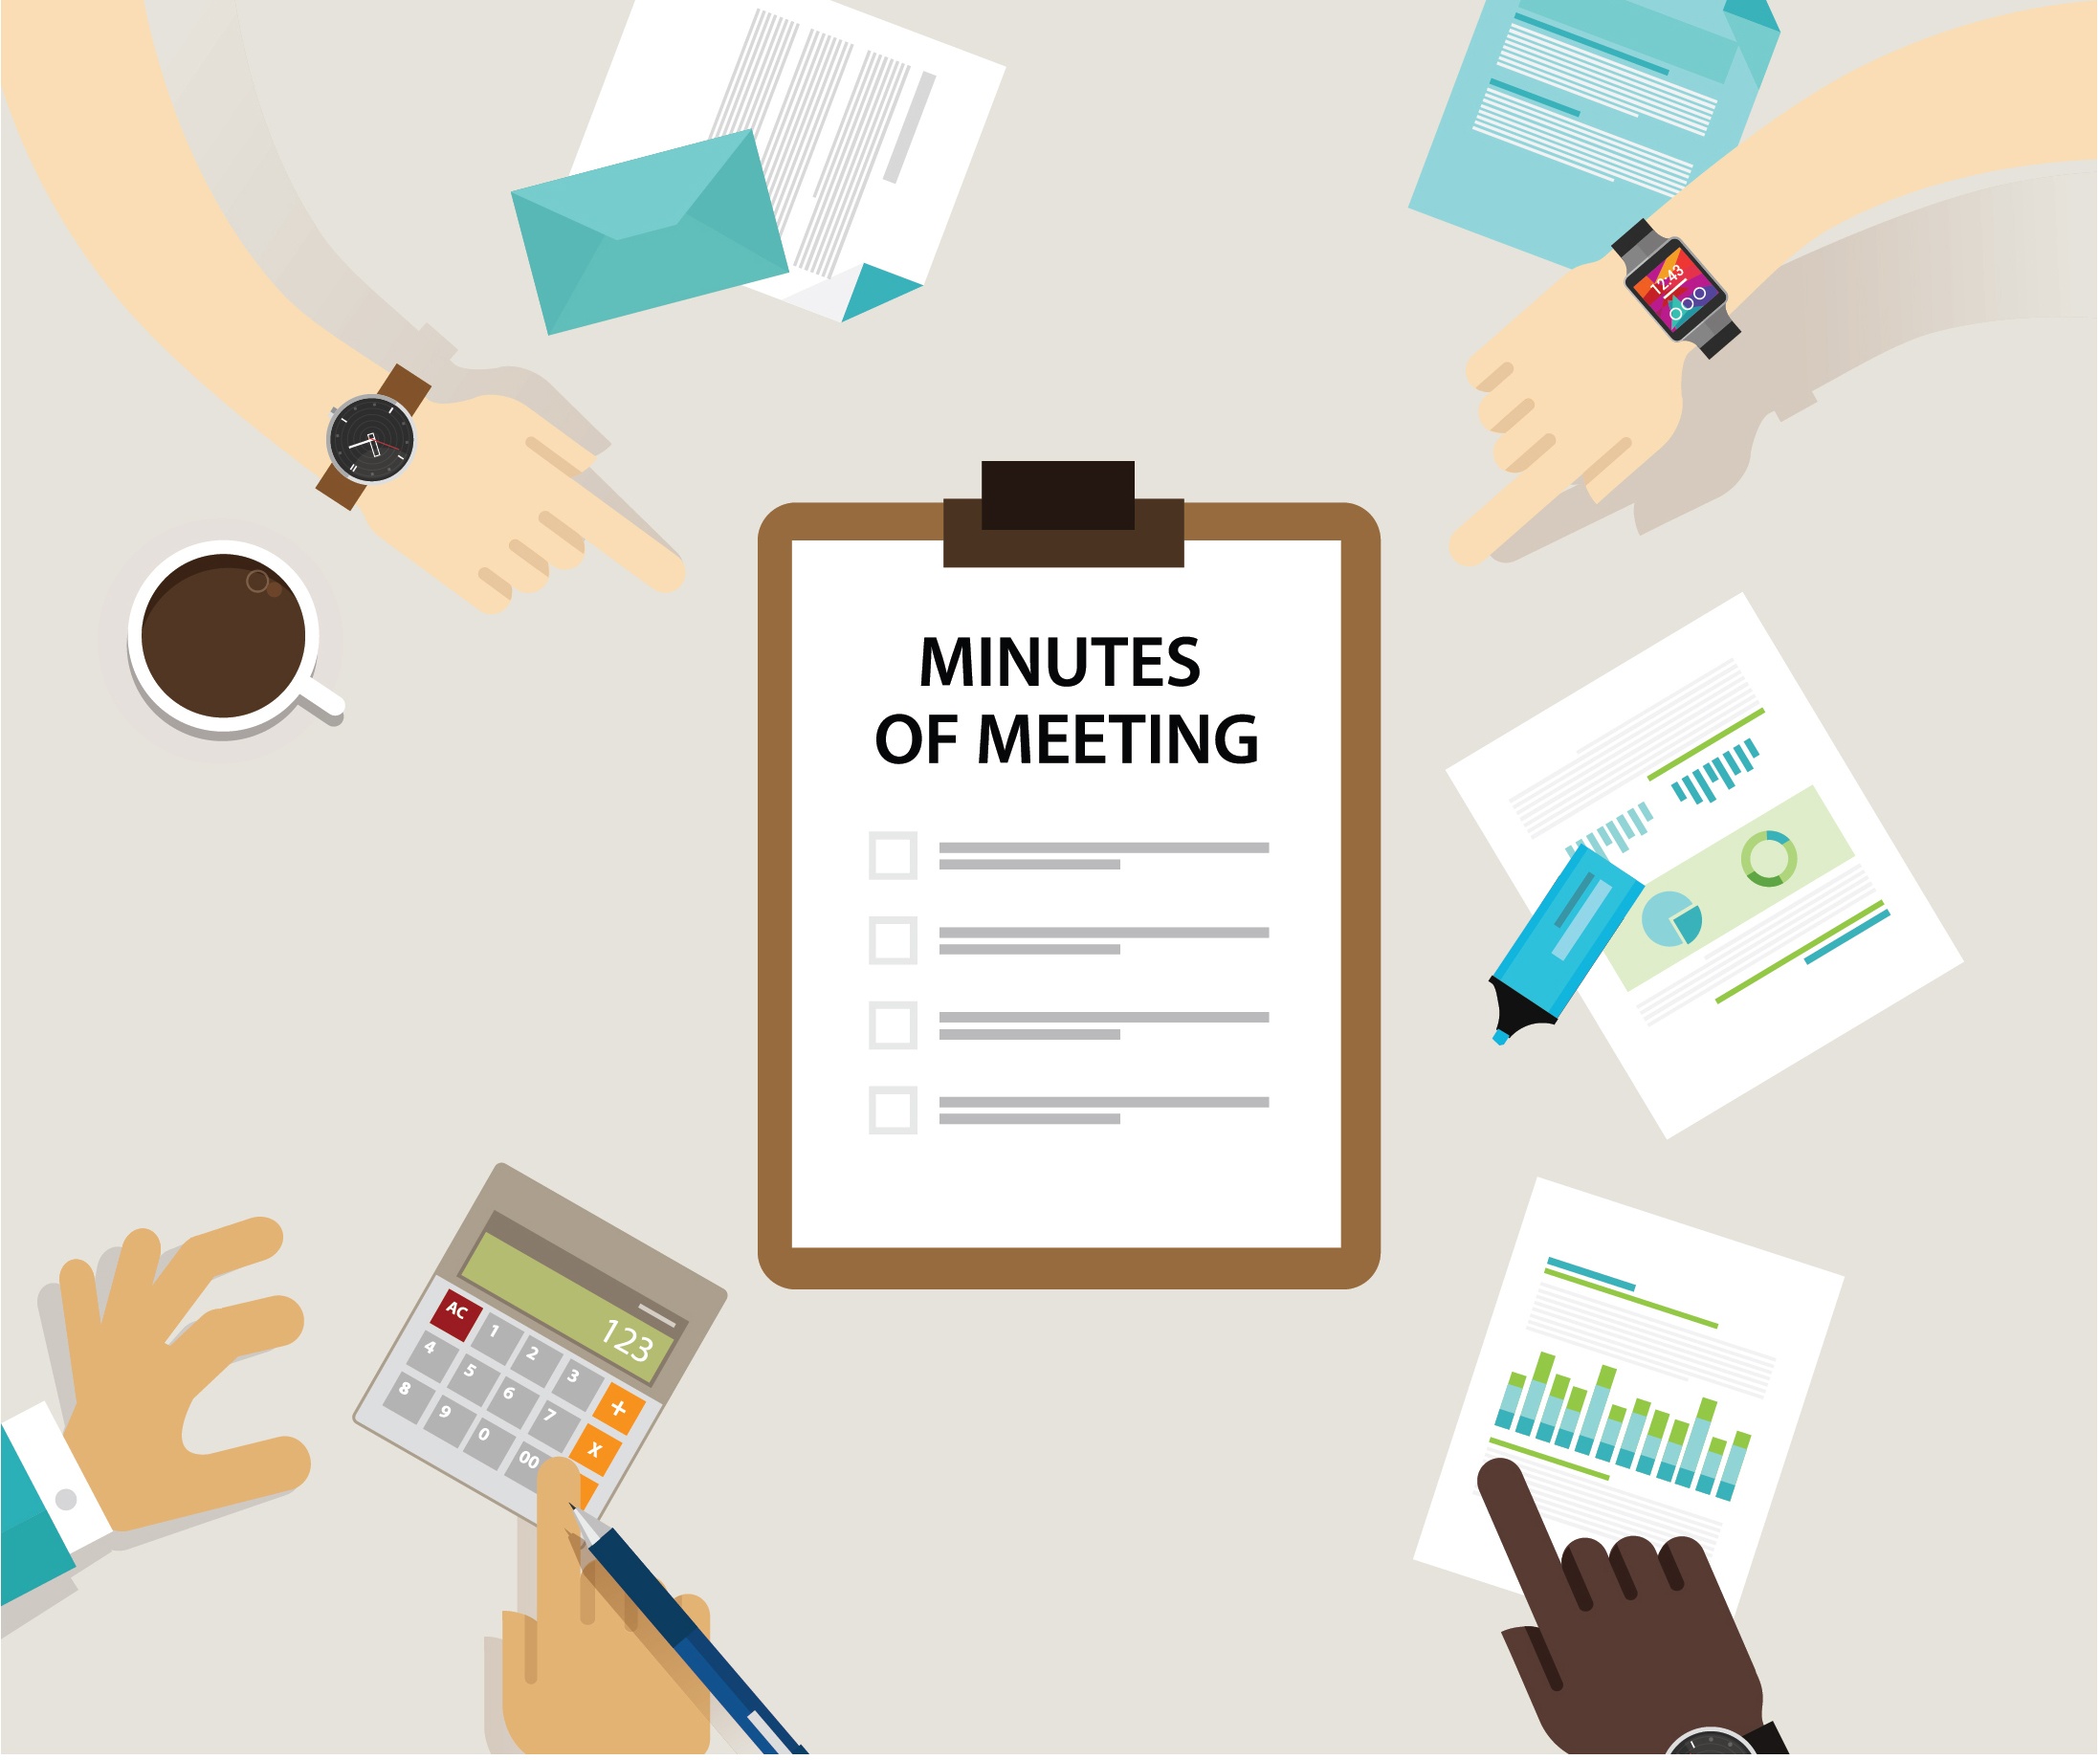 Meeting Minutes Template: Top 6 Easiest Guides That Will Help You To Write An Effective Meeting Minutes In 2021